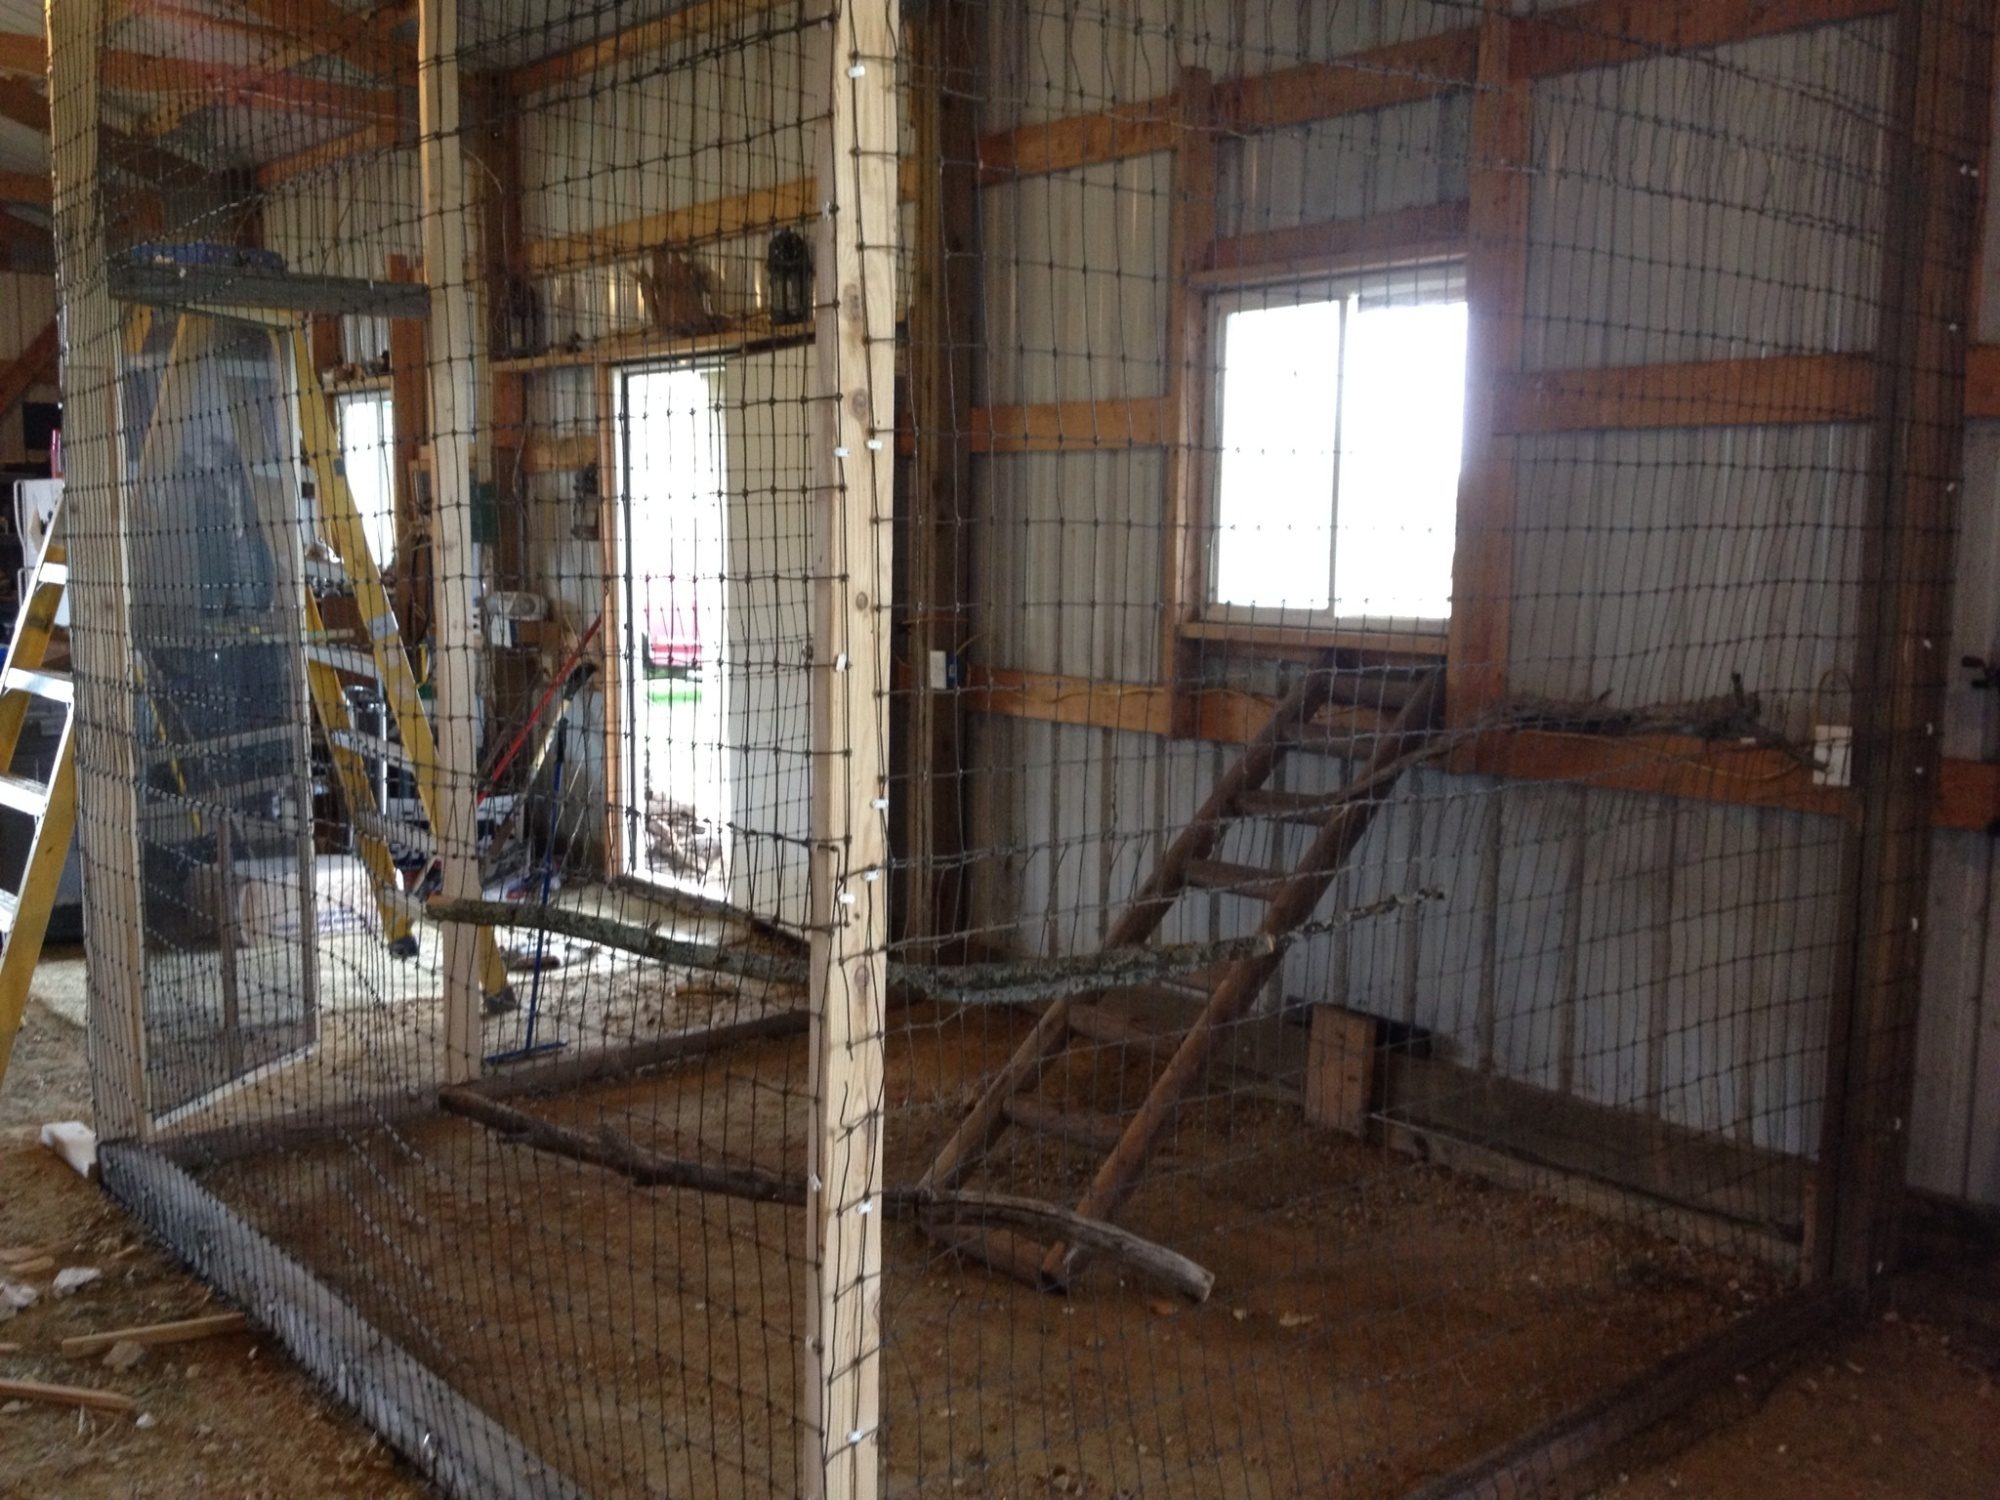 This is the inside coop where our roosters are roosting.